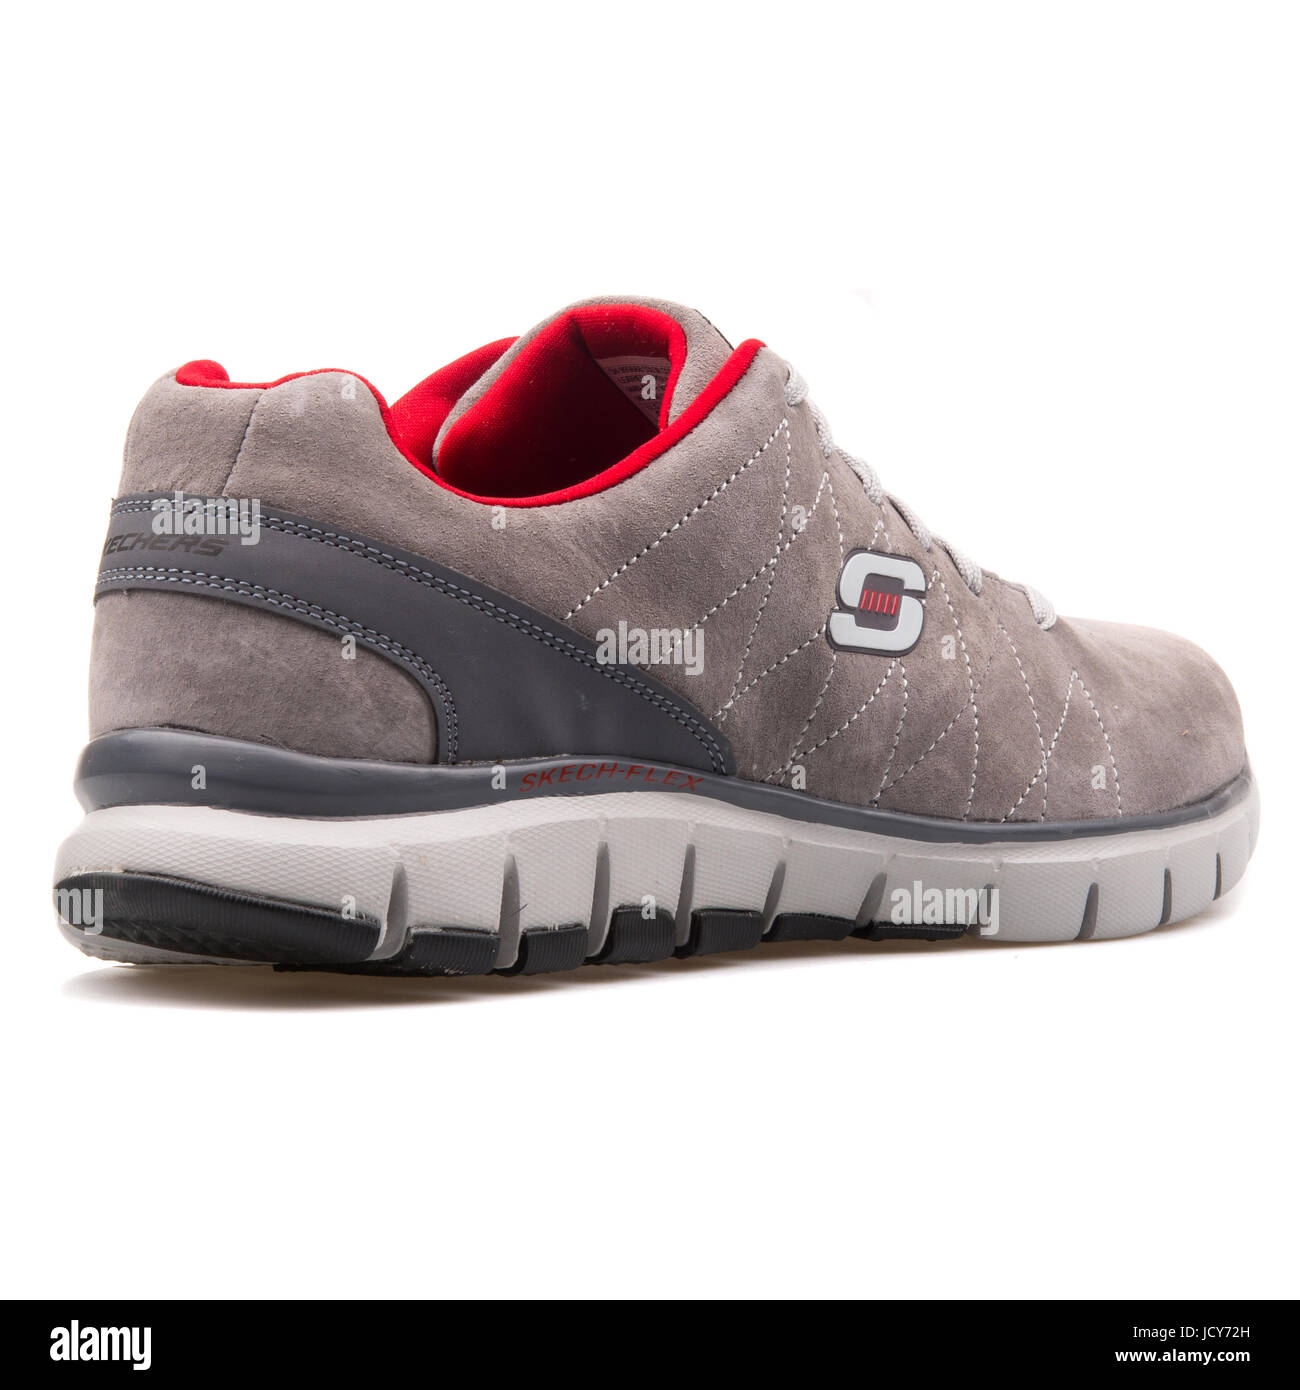 Skechers Natural Vigor Charcoal and Red Men's Running Shoes - 999668-CCRD  Stock Photo - Alamy